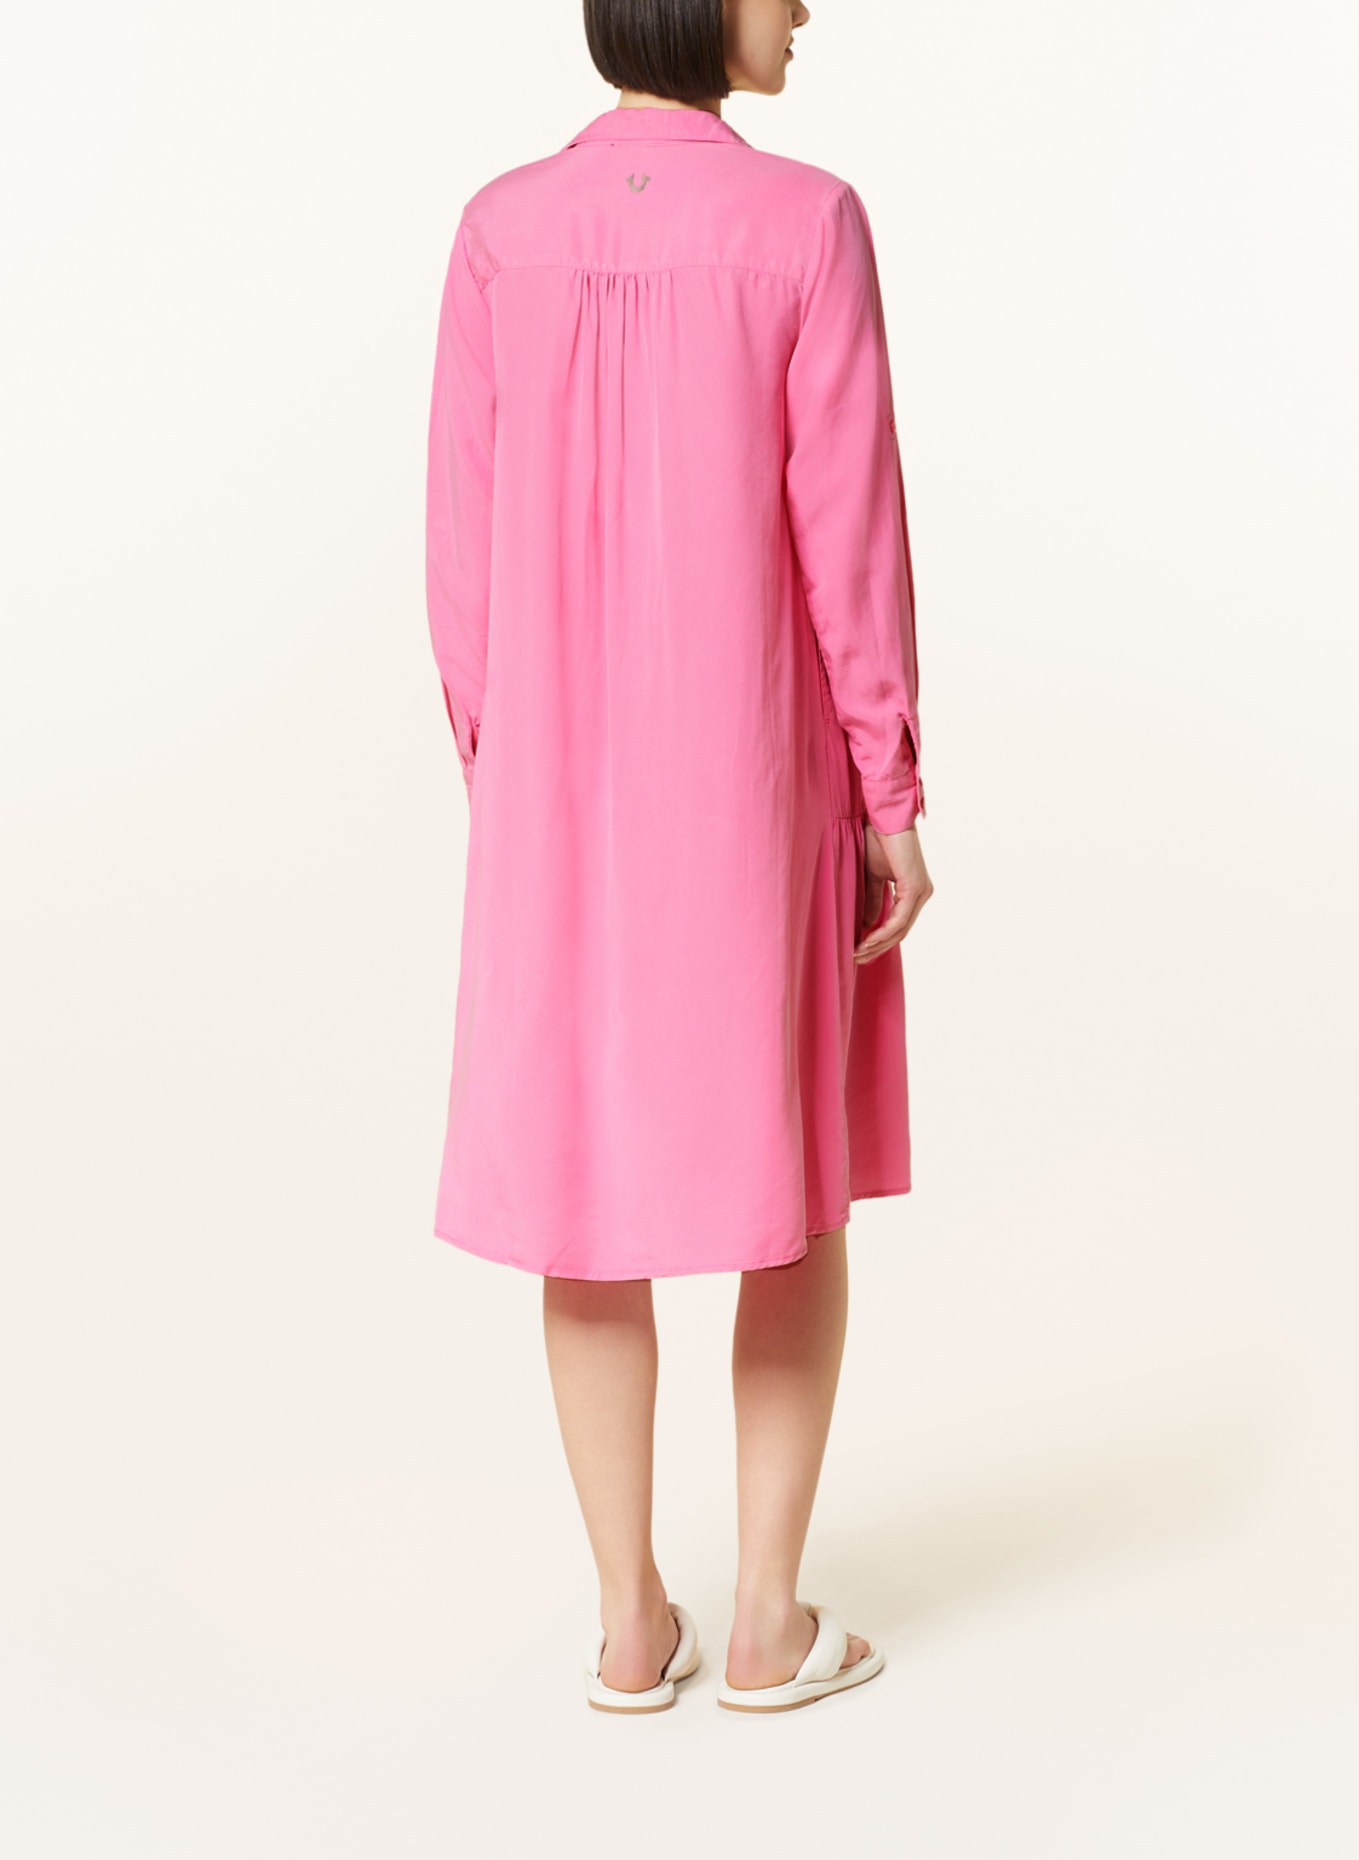 TRUE RELIGION Dress with frills, Color: PINK (Image 3)